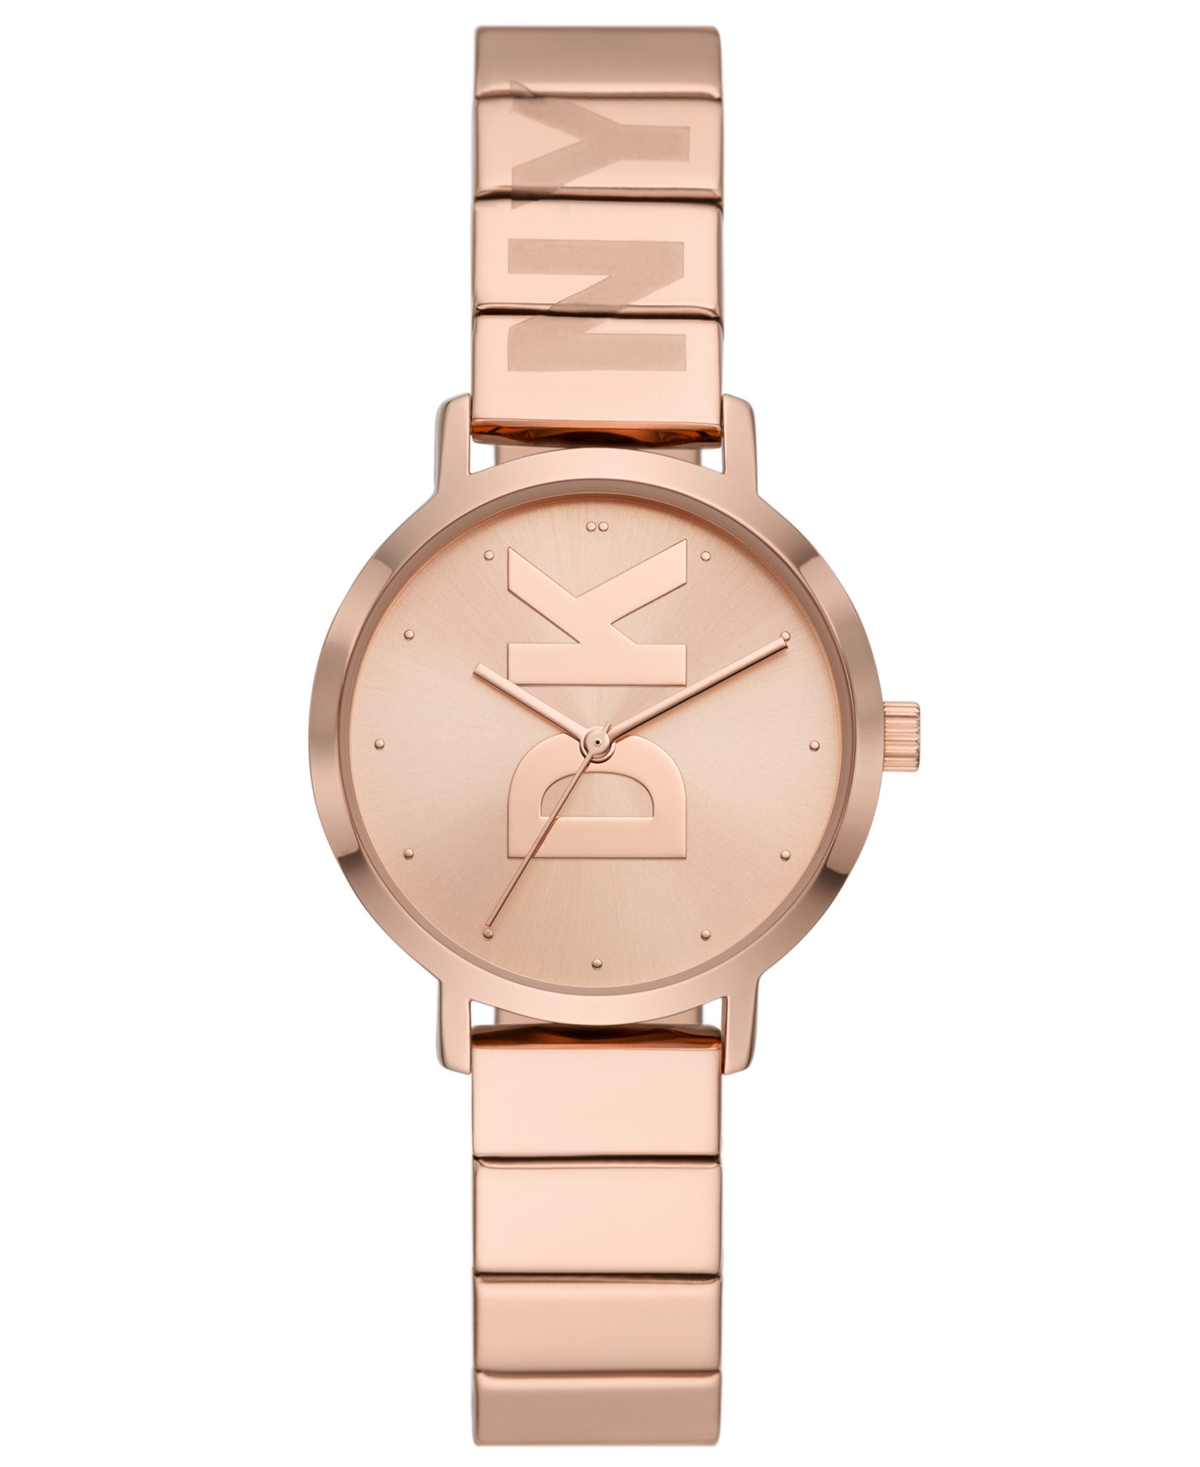 Dkny's Women's The Modernist Three-Hand Rose Gold-tone Stainless Steel Bracelet Watch 32mm - Rose Gold